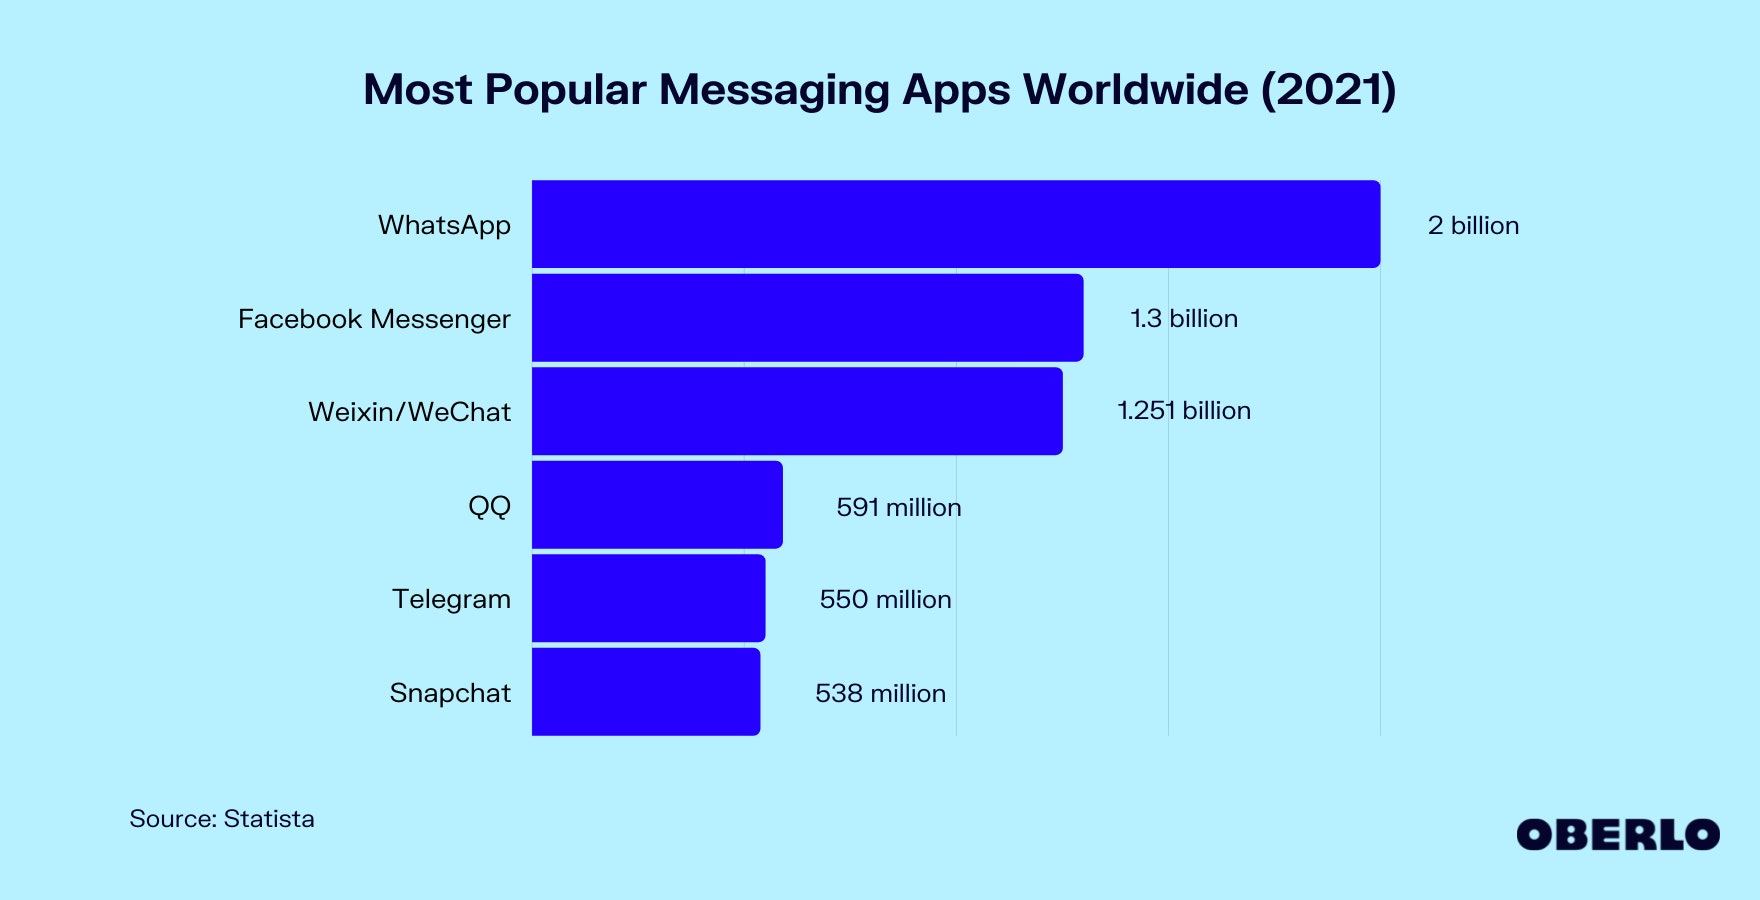 Chart of Most Popular Messaging Apps Worldwide in 2021